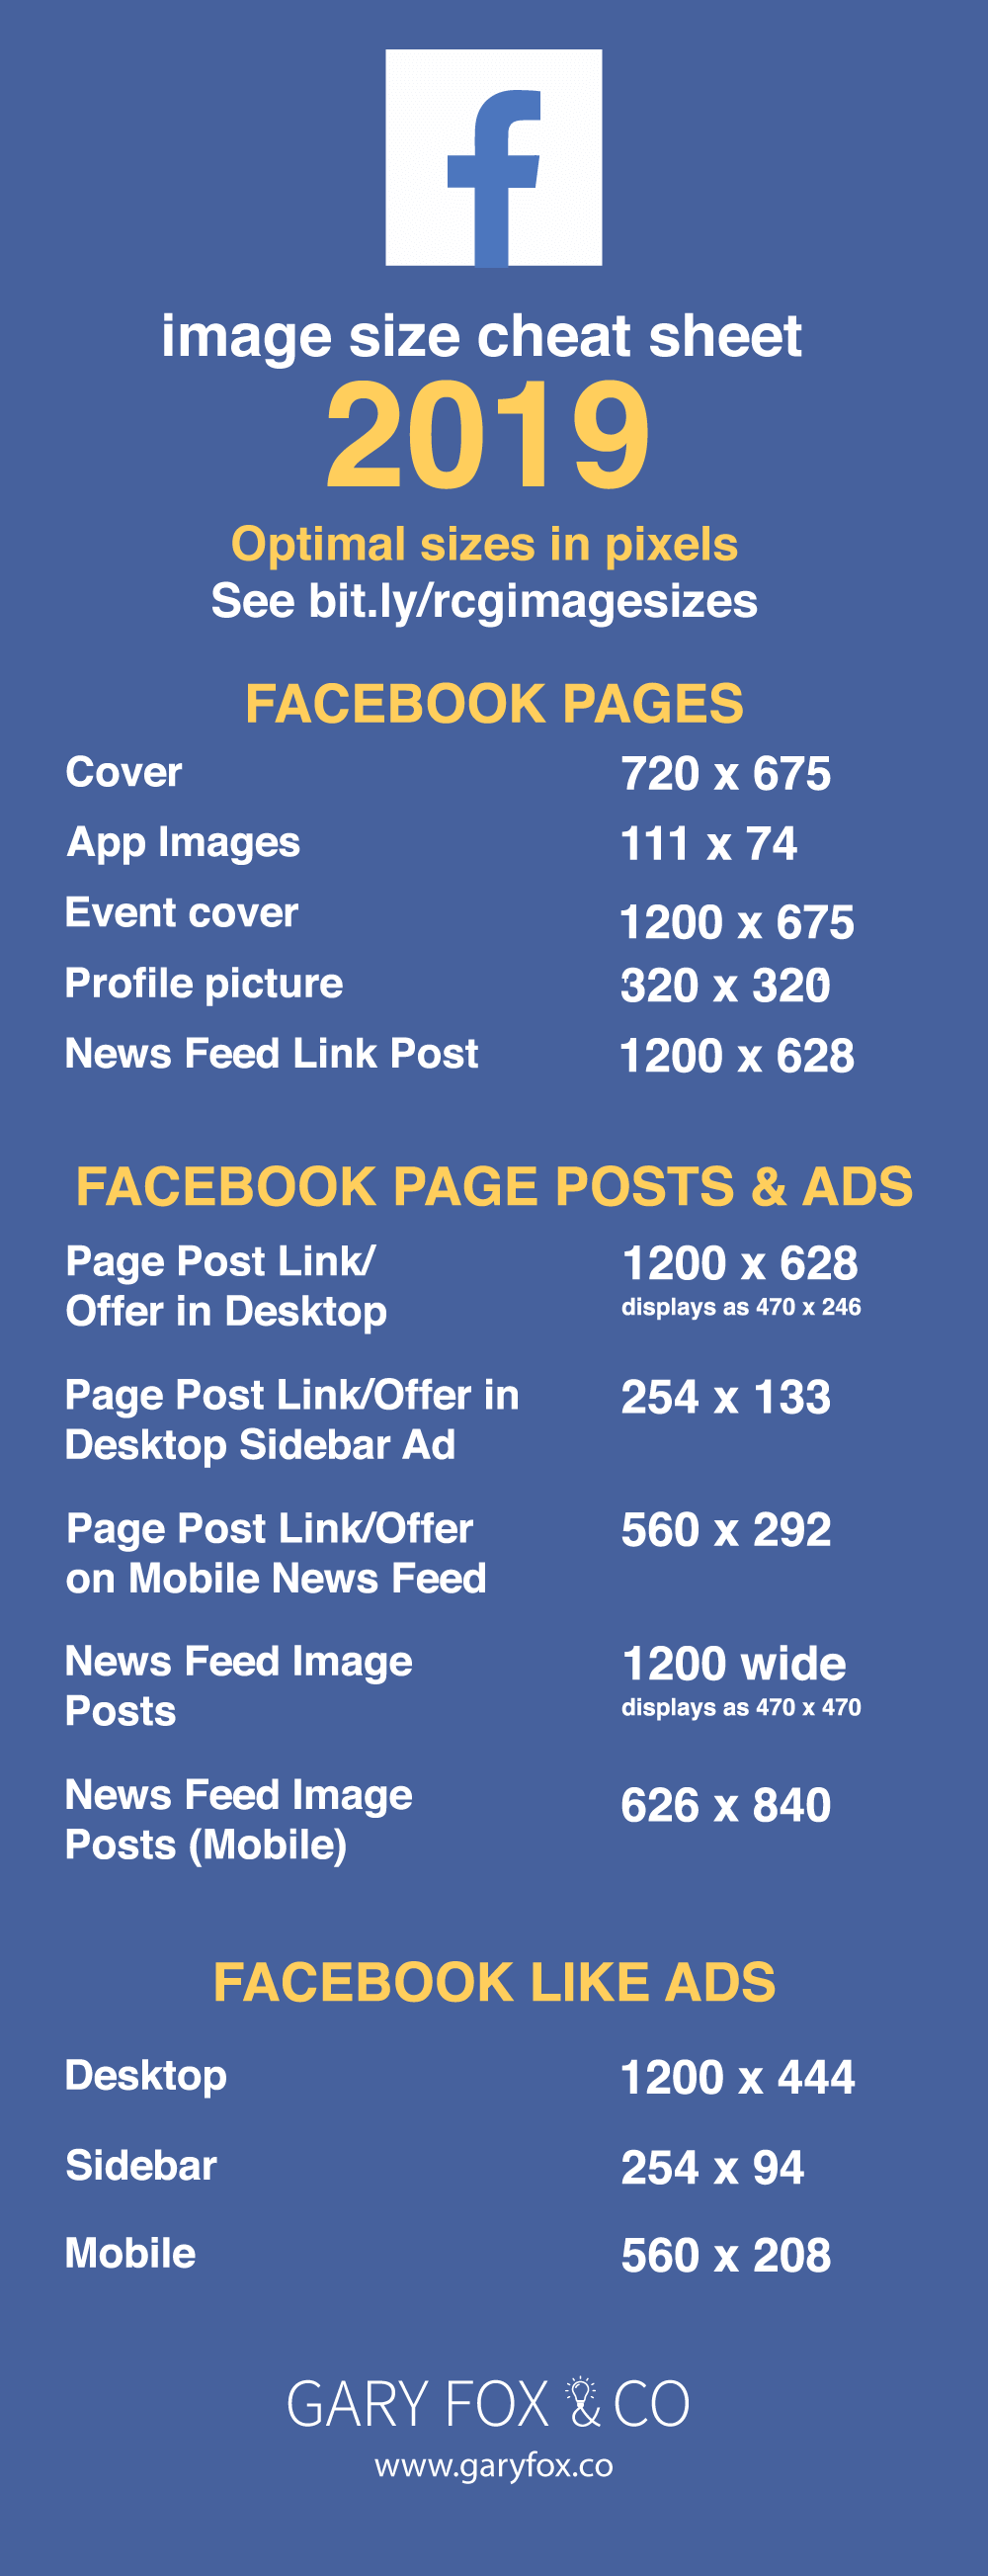 Facebook Image Sizes 2019 - Ultimate Guide And Tips